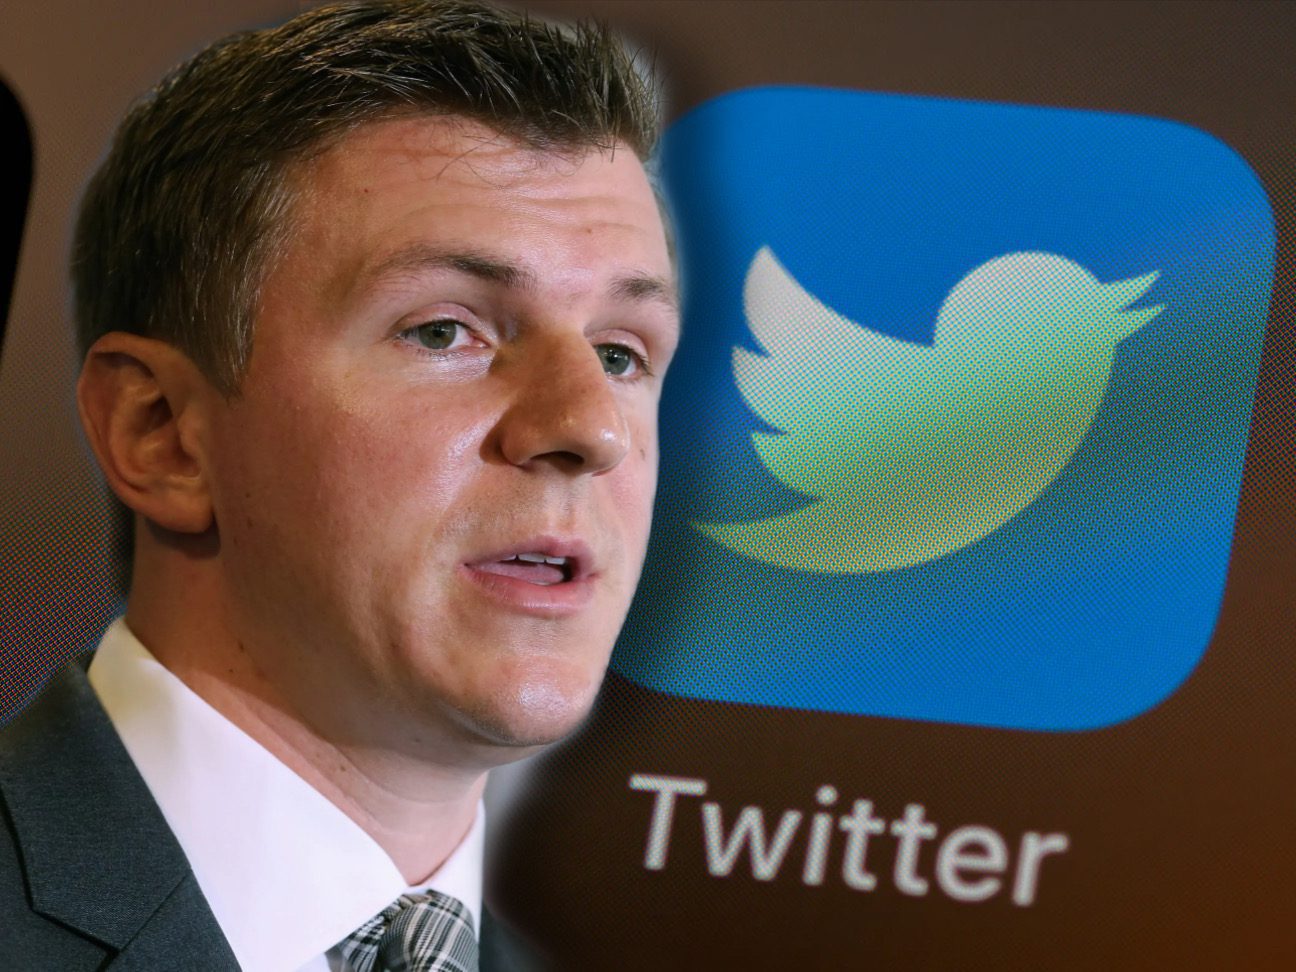 Project Veritas Locked Out of Twitter After Latest Bombshell Video Exposing Pfizer